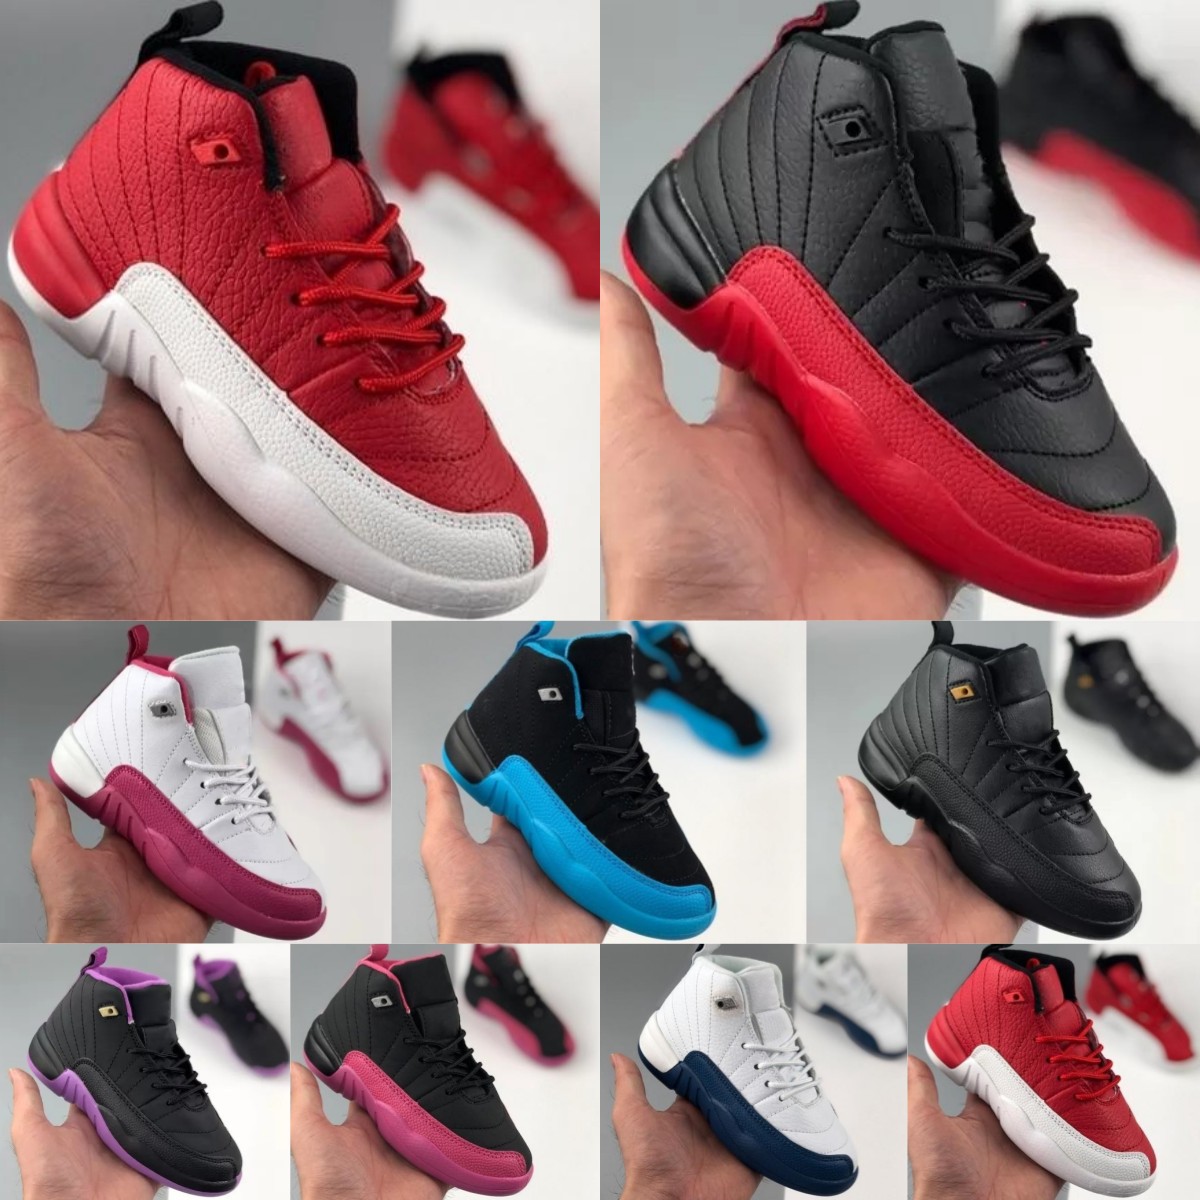 

Kids Shoes 12s 12 Basketball Sneakers Sport Toddler Designers XII Outdoor Youth Flu Game Boys Girls Children Runner Trainers Stealth Blue Baby Infants Shoe Size 28-35